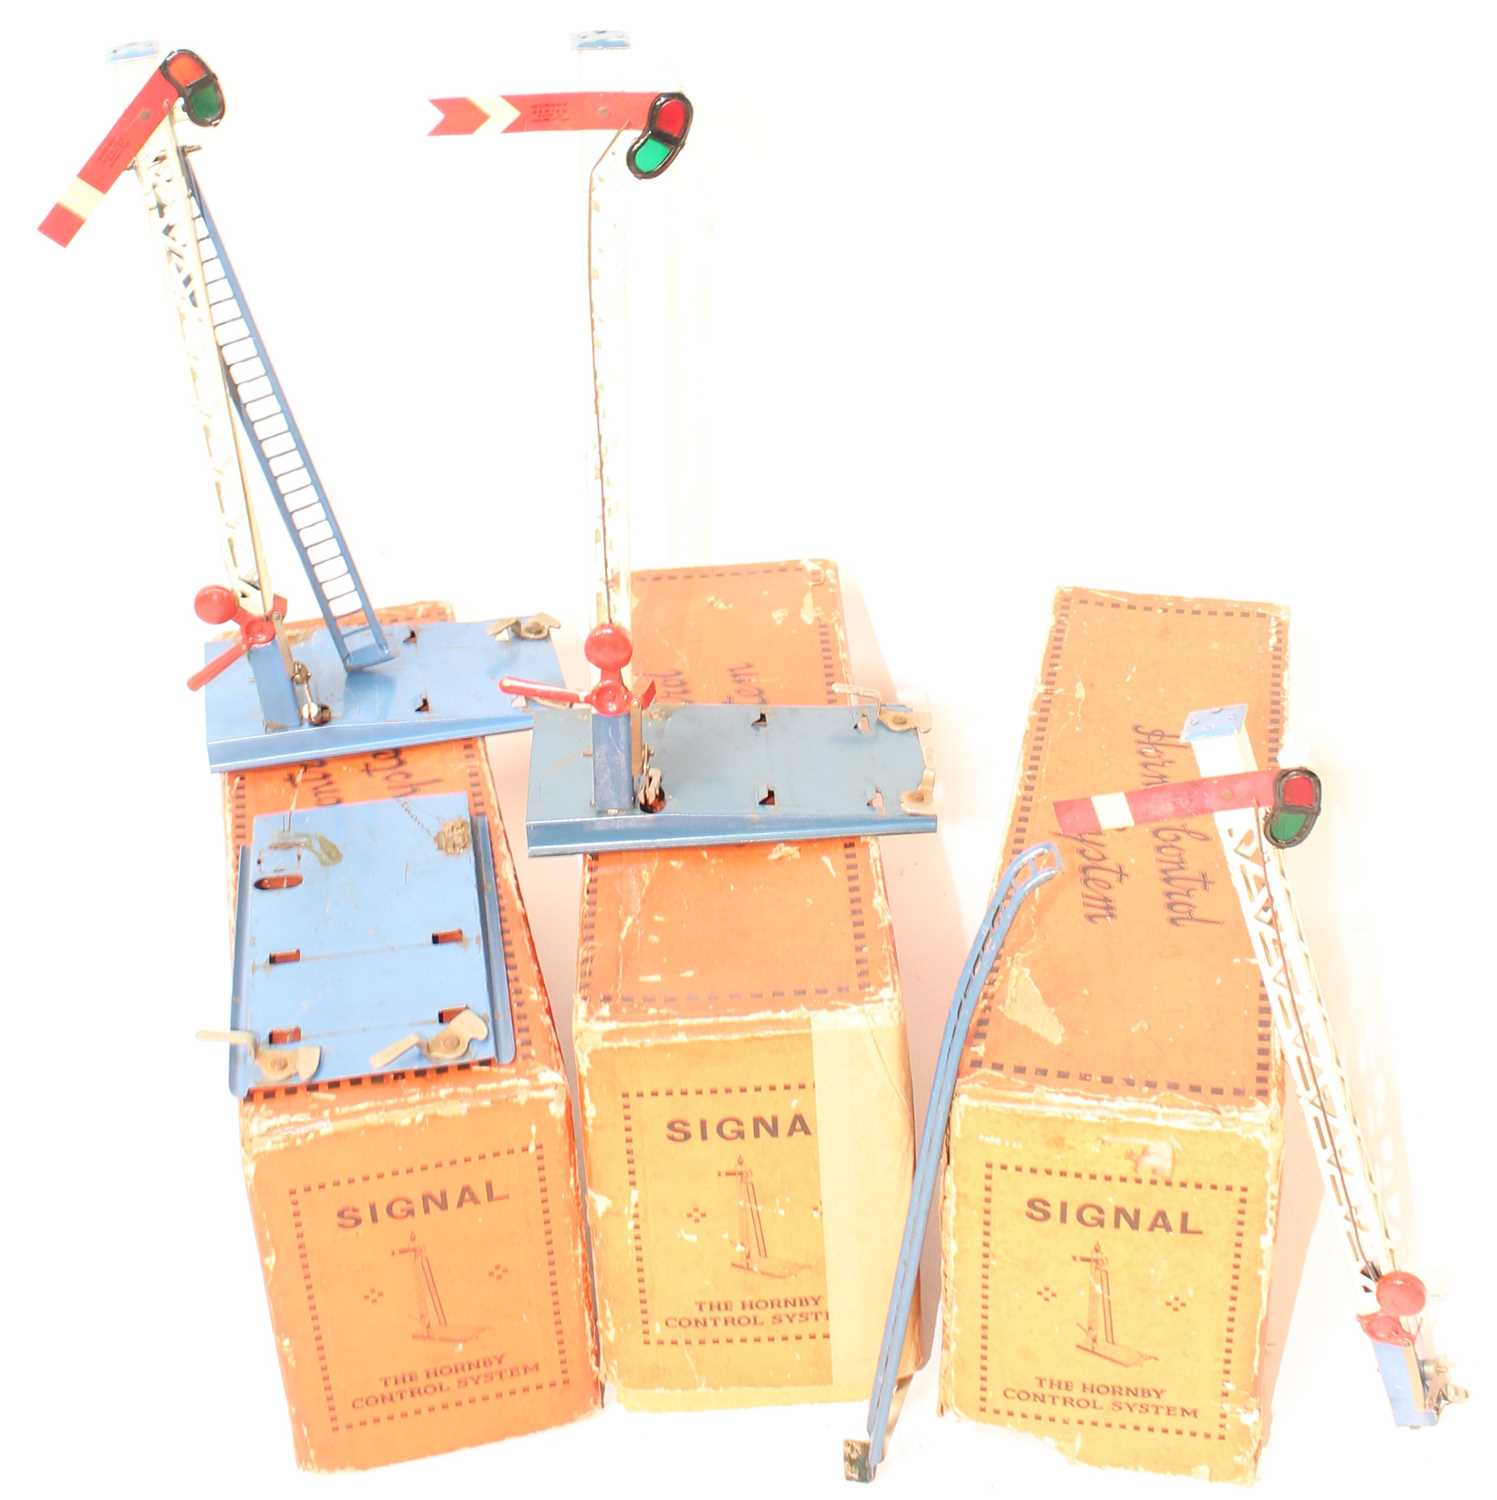 3 Hornby Single Arm control signals, 2x Home and 1x Red Distant, blue base, ladders and flat top,